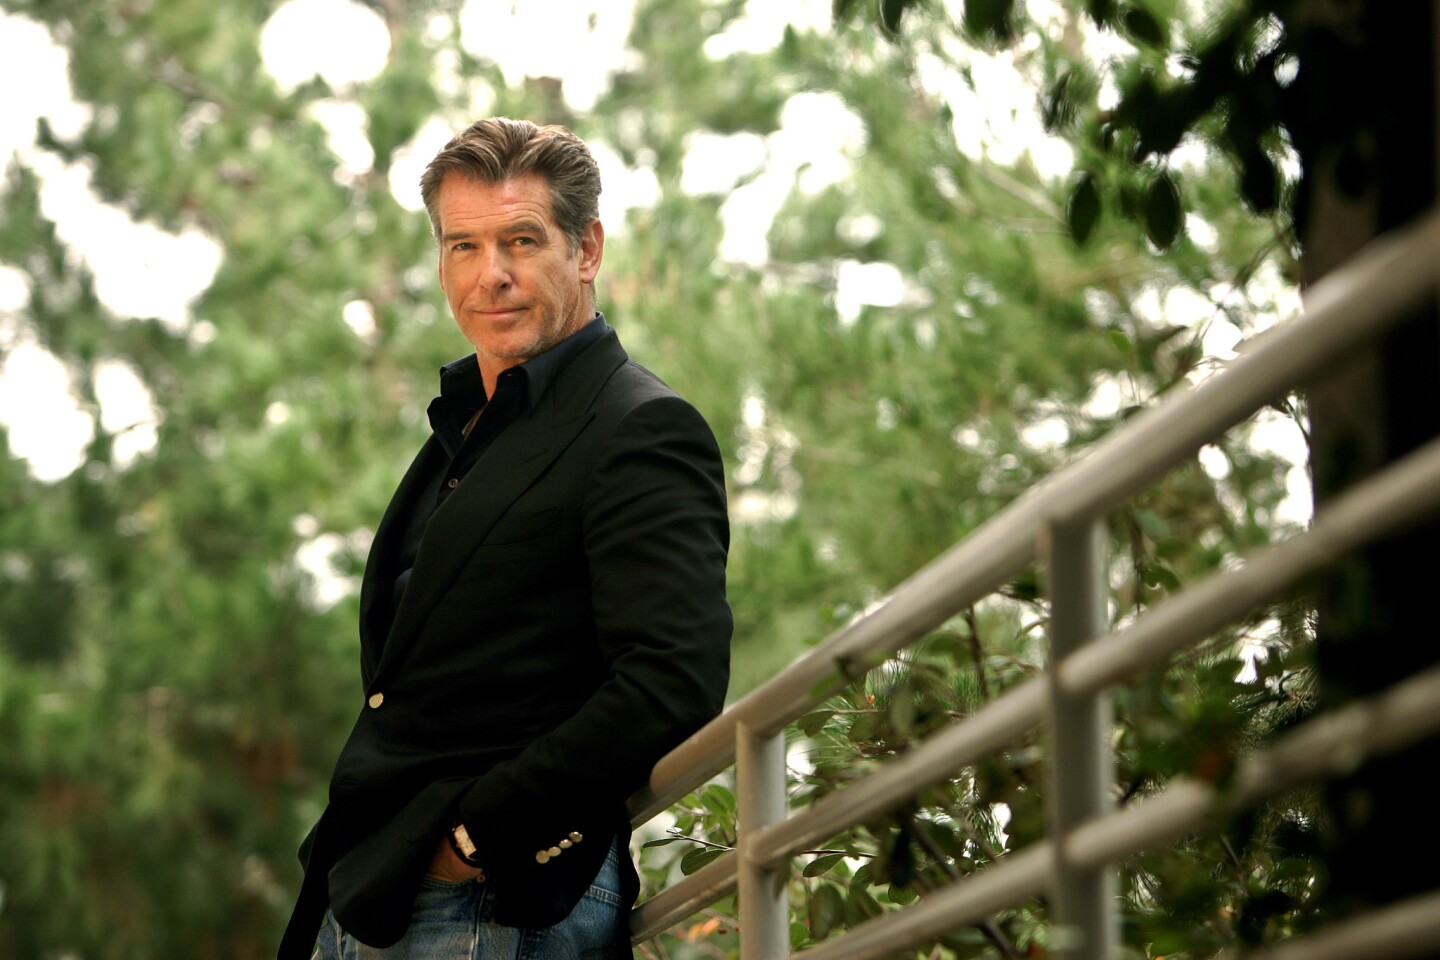 Pierce Brosnan also stars in the summer thriller "The November Man," adapted from Bill Granger's novel "There Are No Spies." (August)